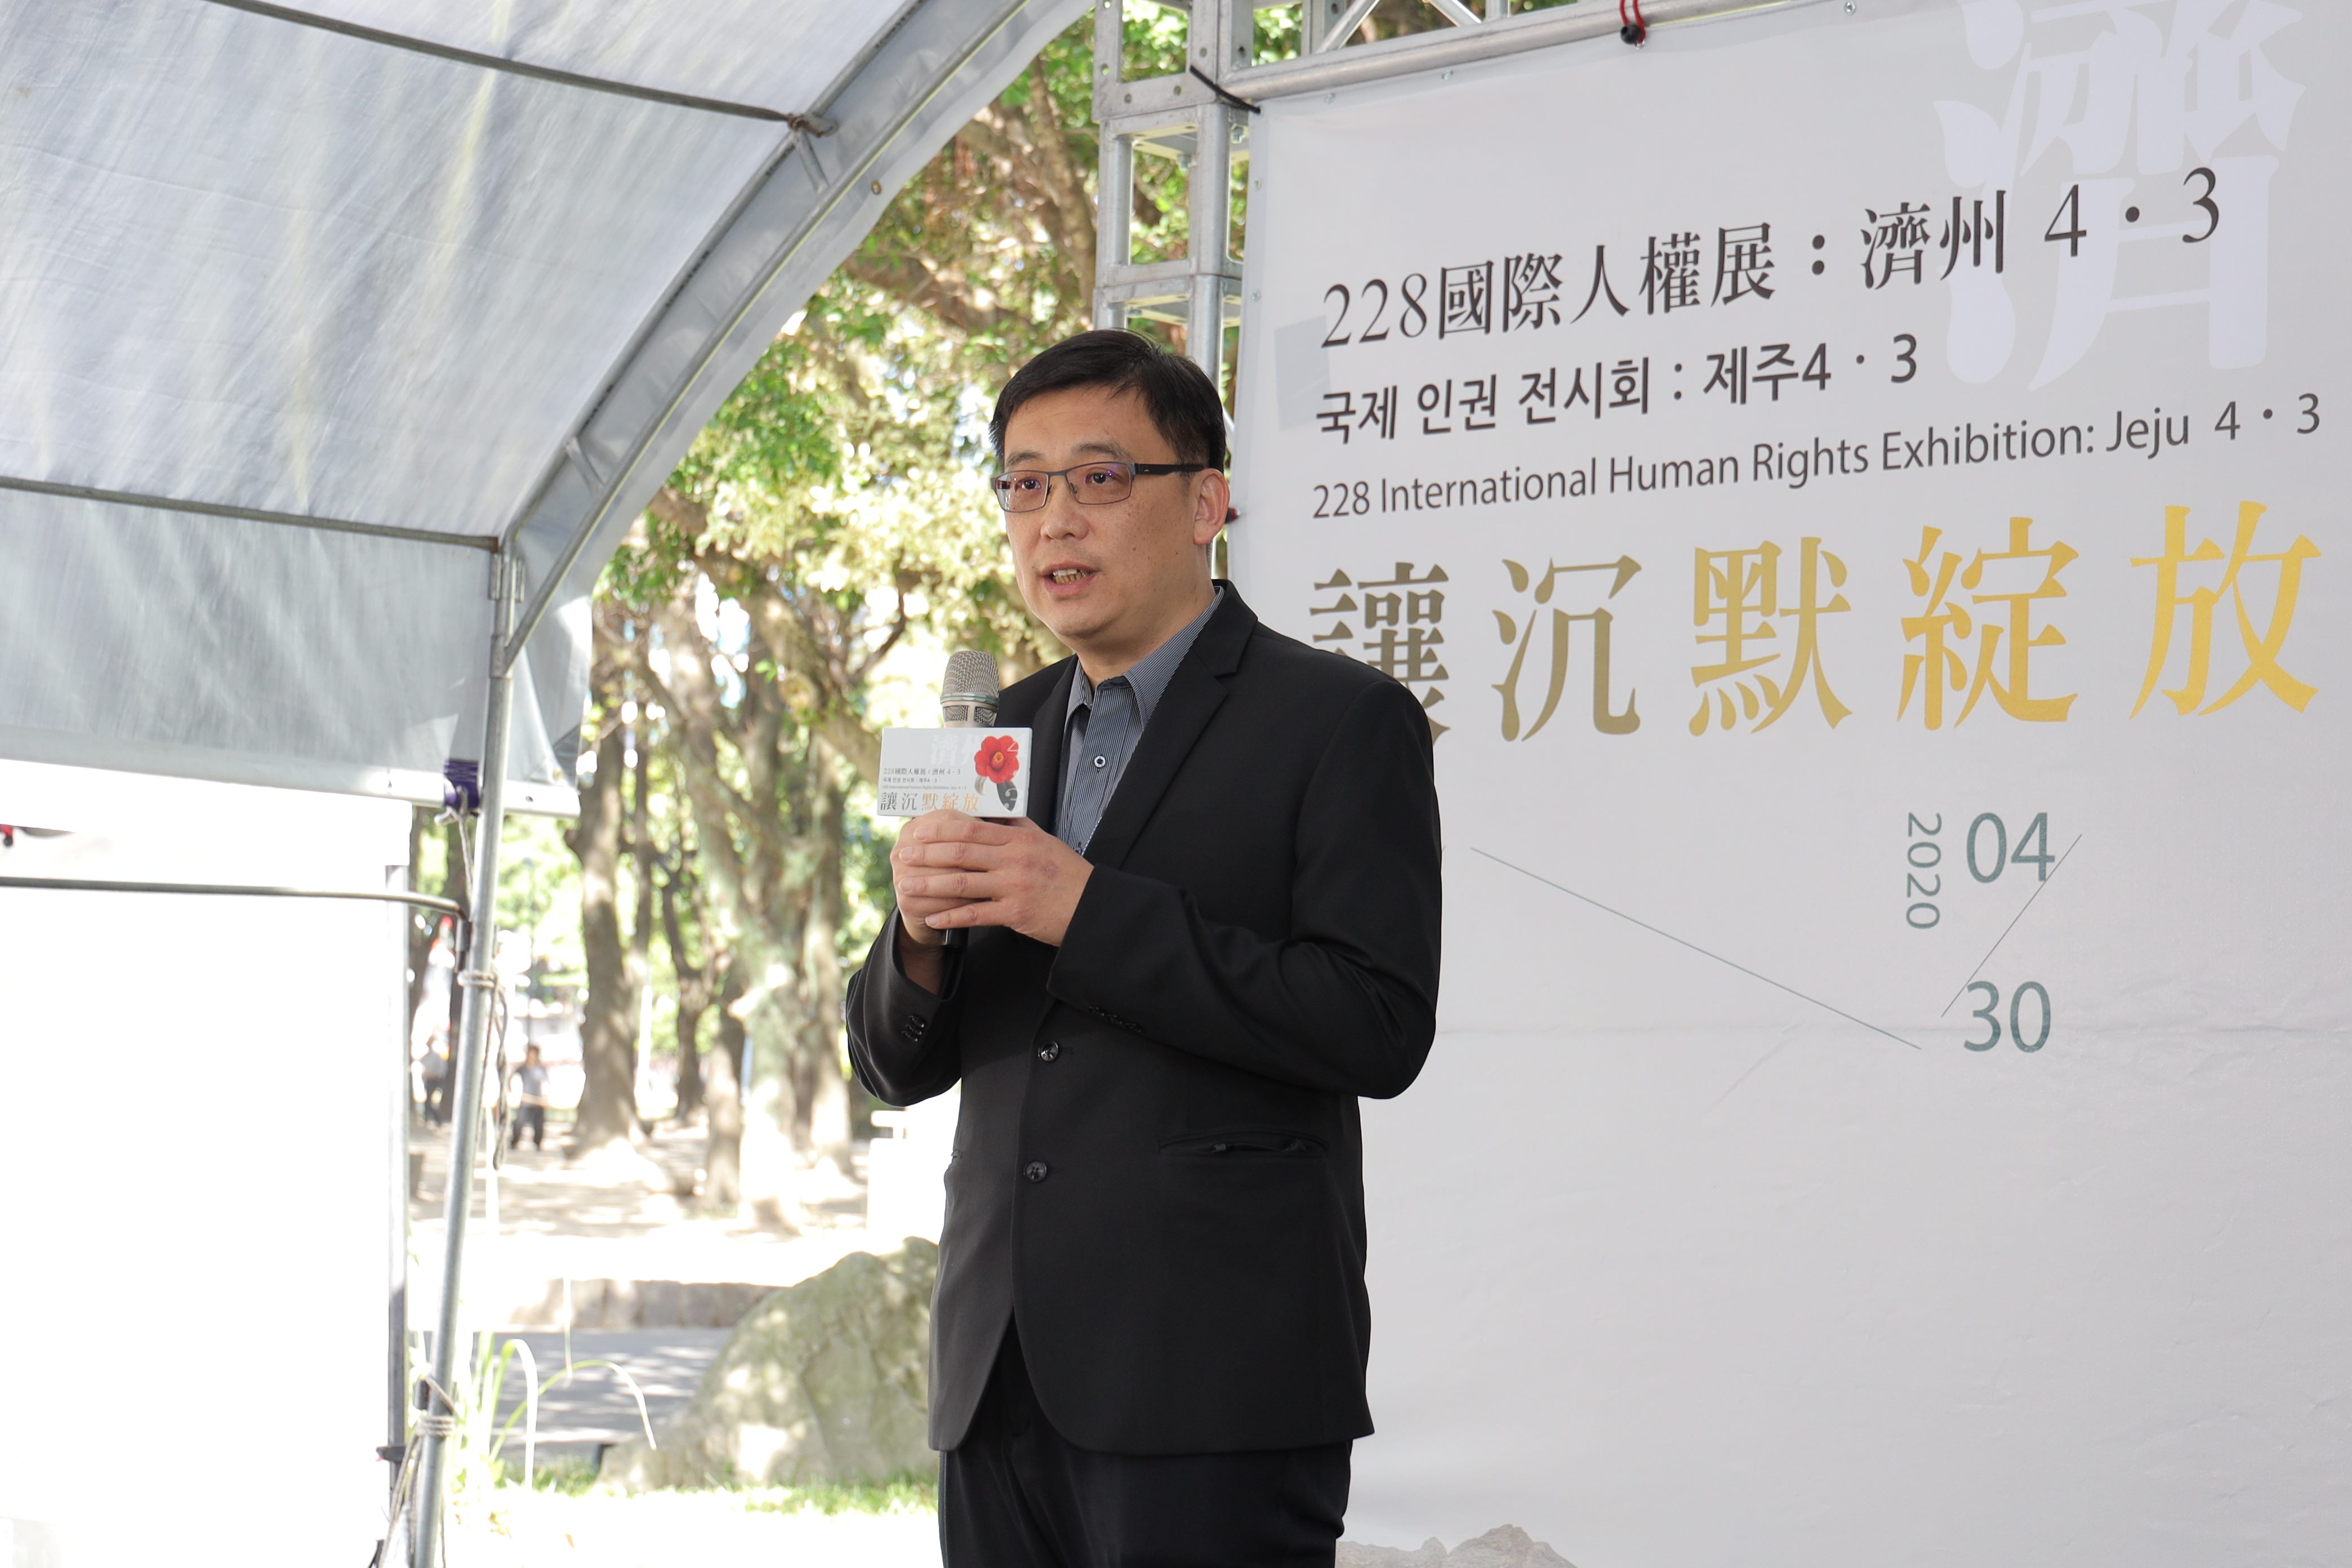 DOCA Deput Commissioner Tian Wei (田瑋) gives a speech at the opening.